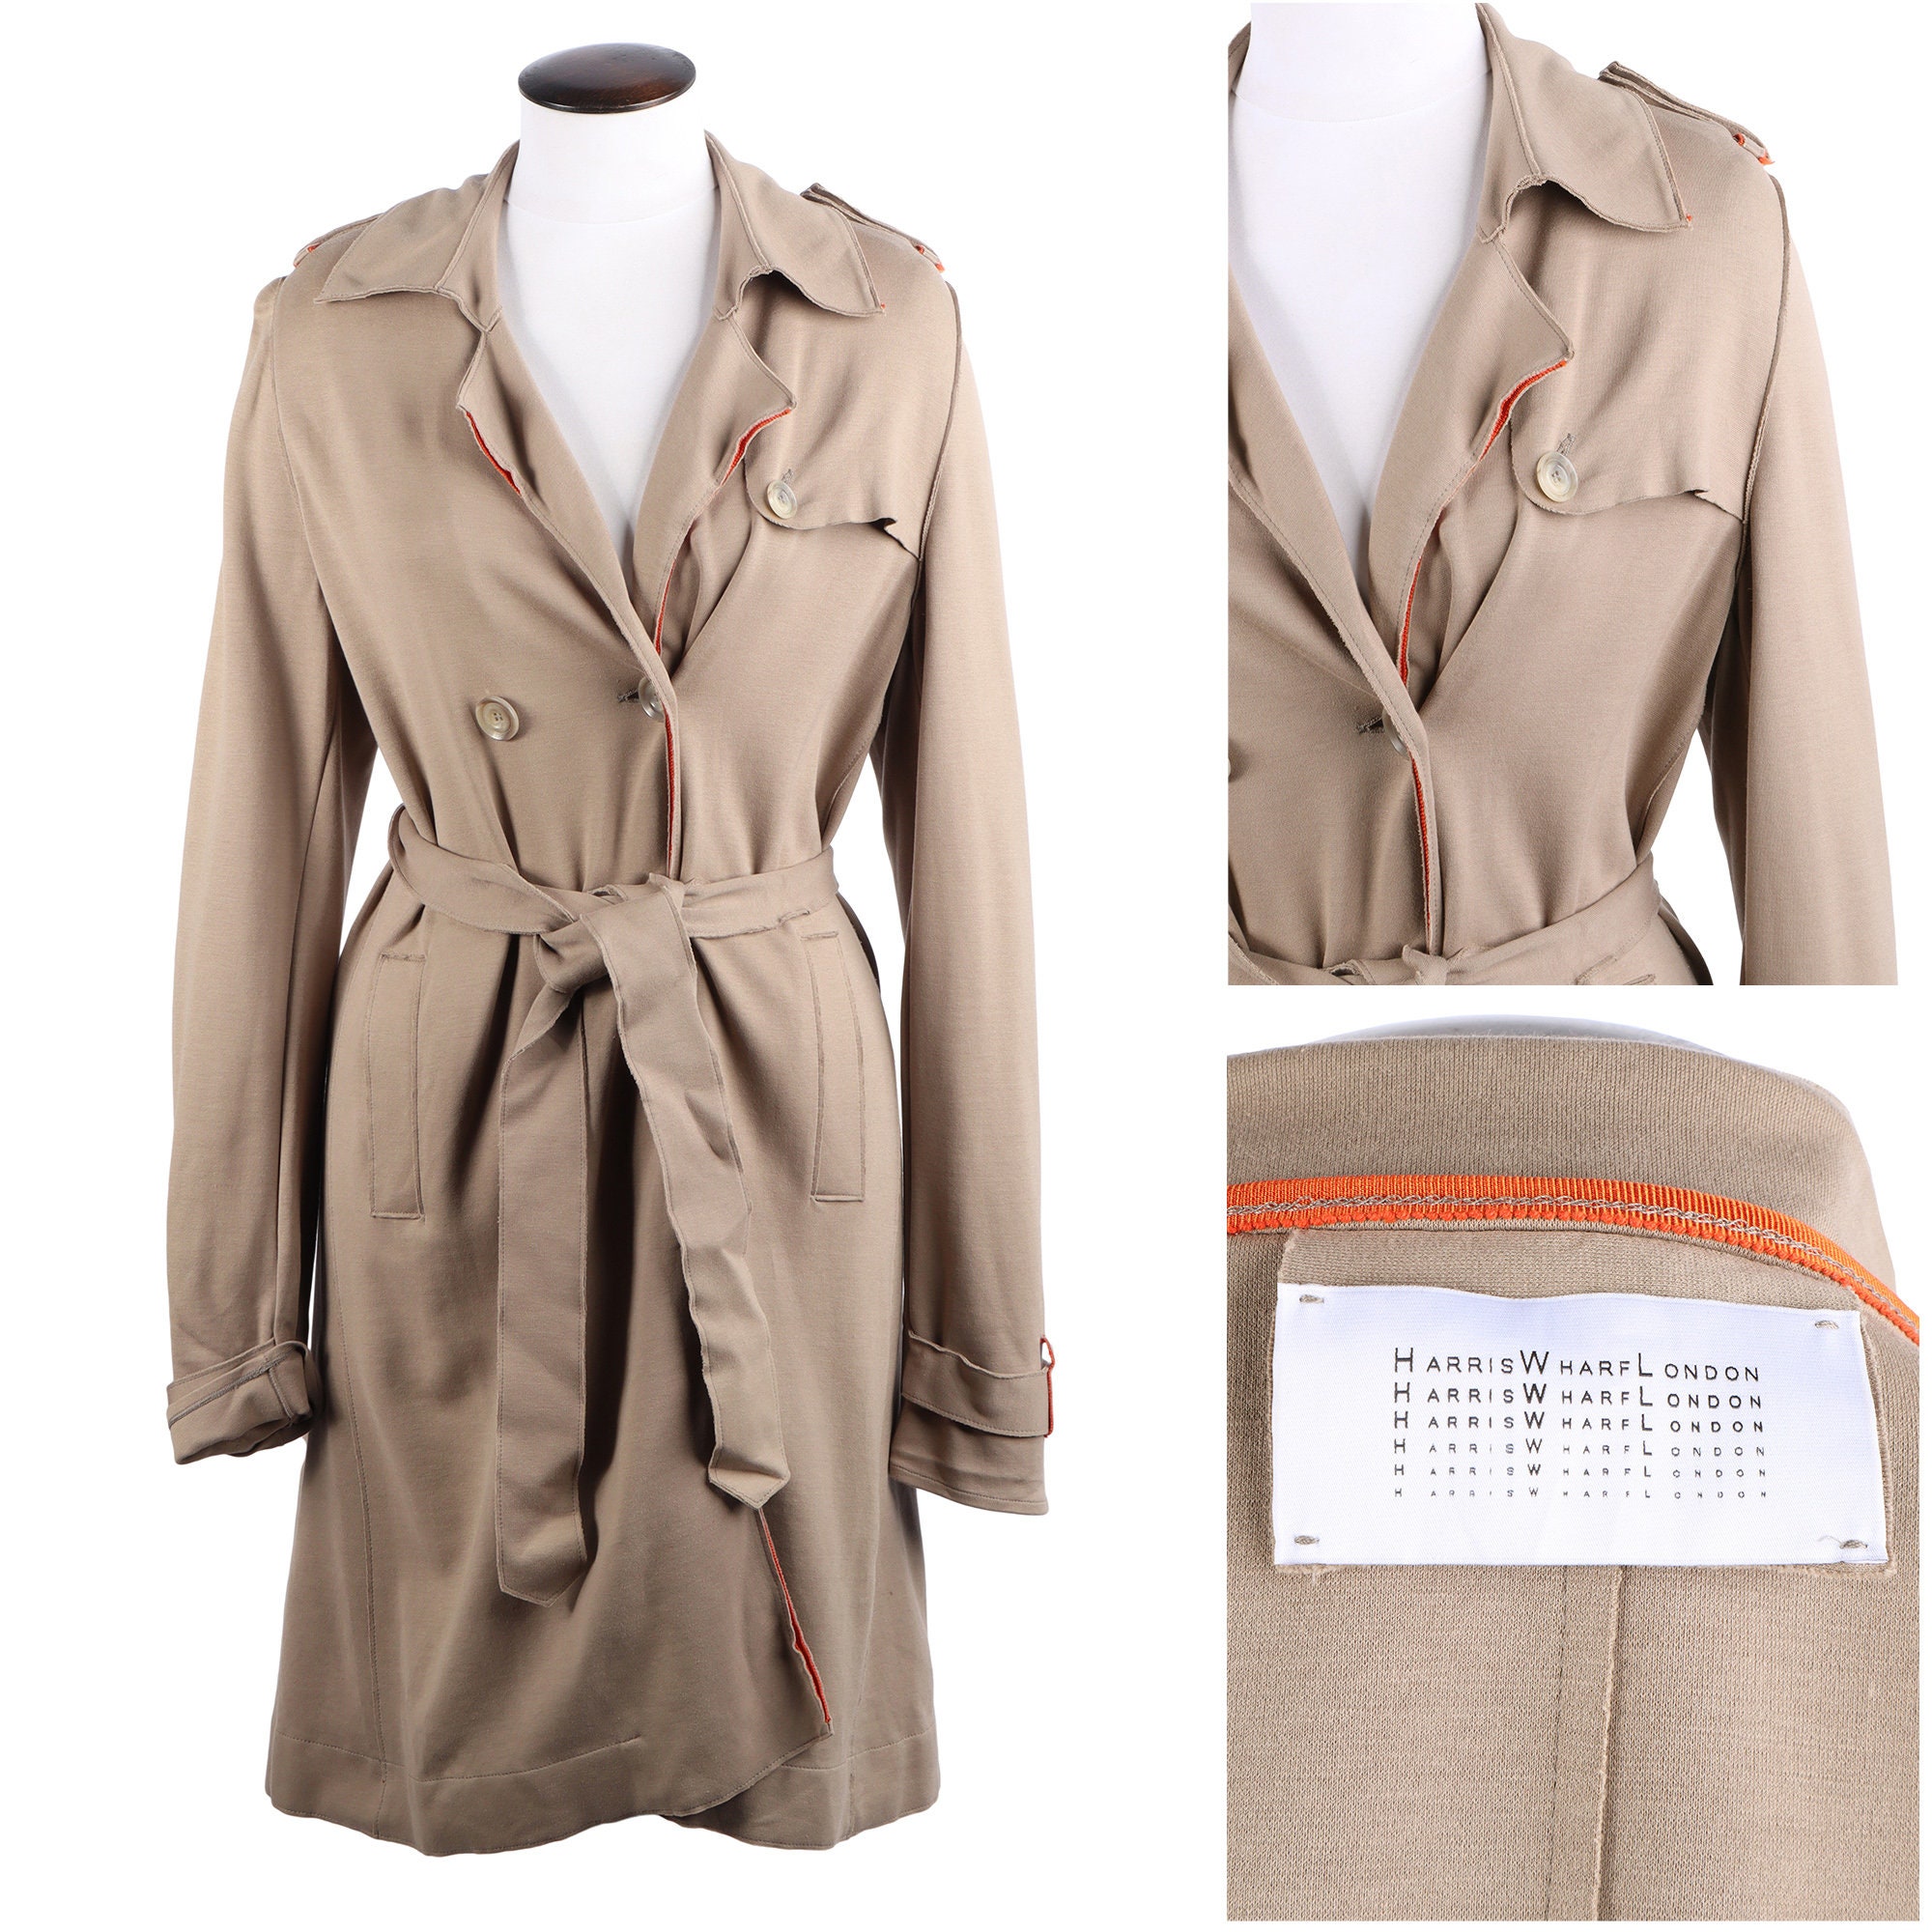 Authenticity of Burberry Trench??? I was stoked to find this and